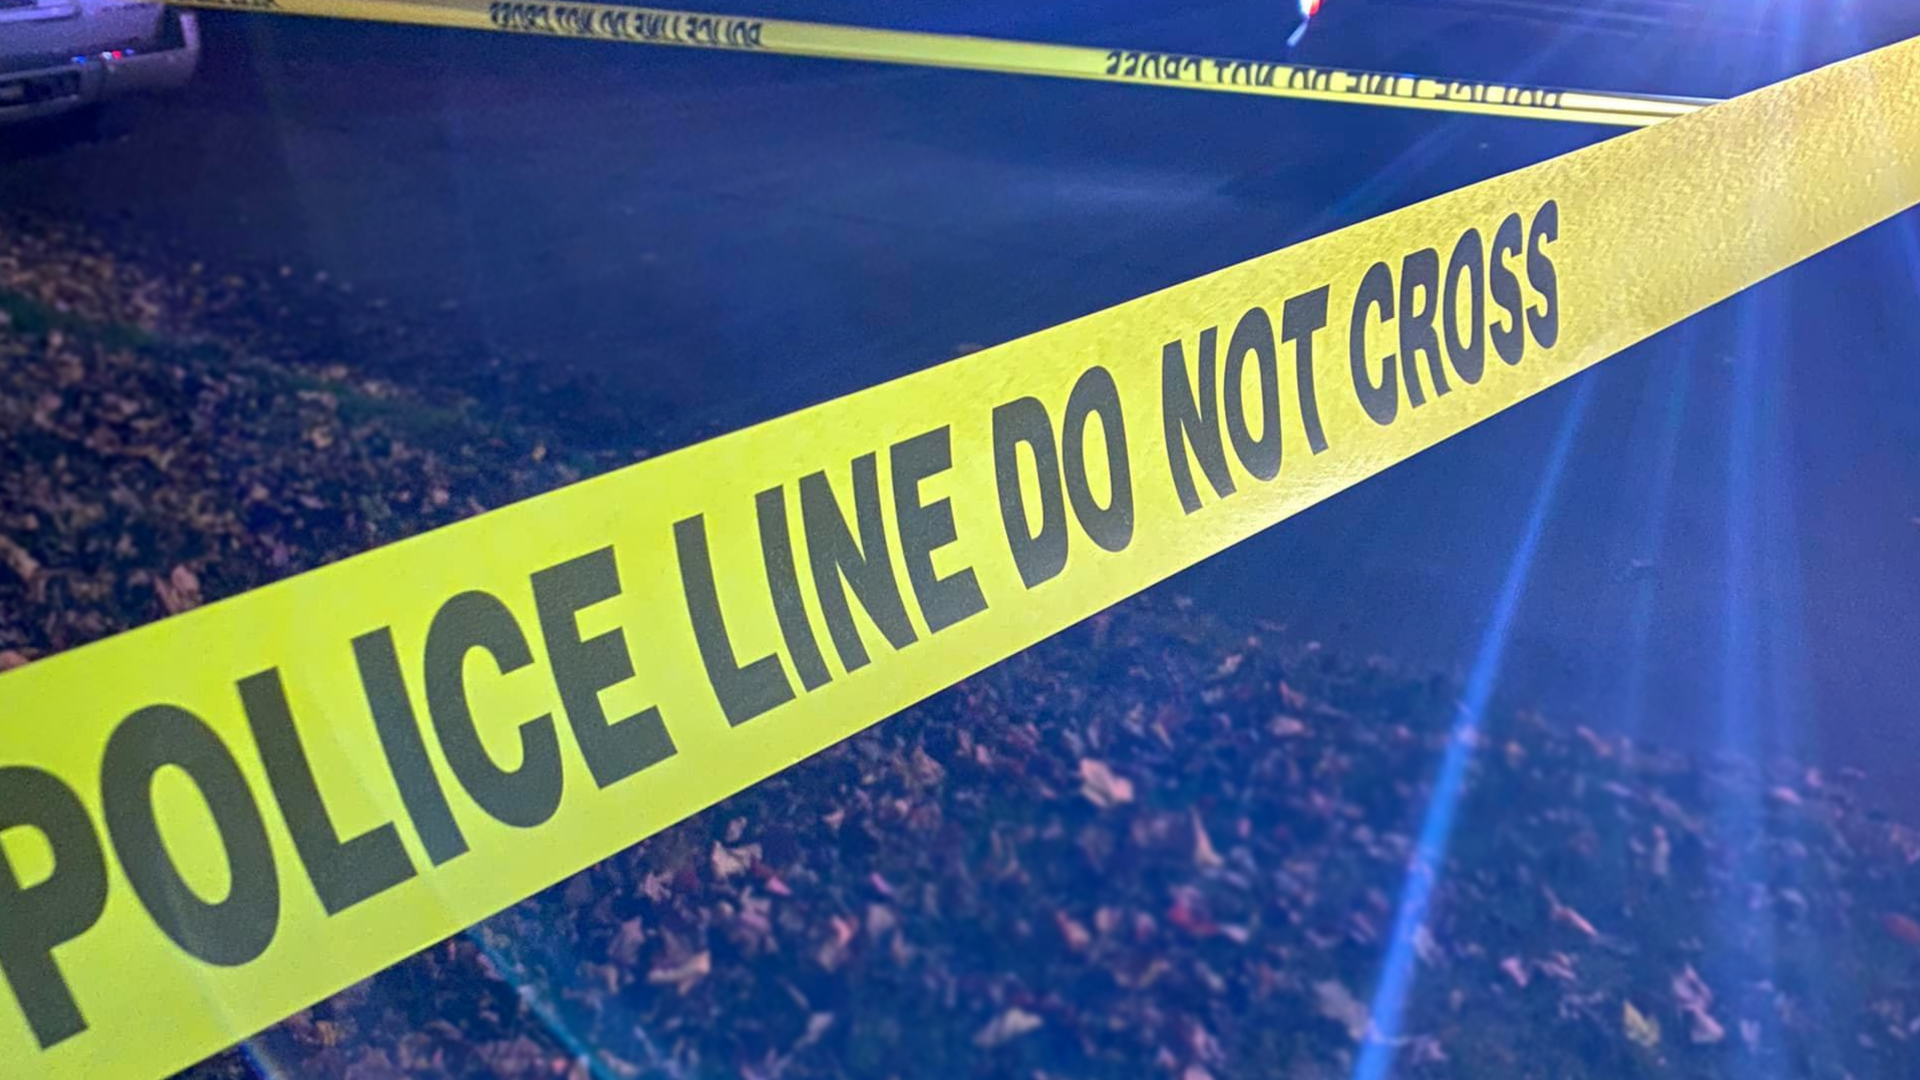 In a recent traumatic event, two young boys died and a third had to undergo surgery following a shooting at a south Toledo apartment complex.